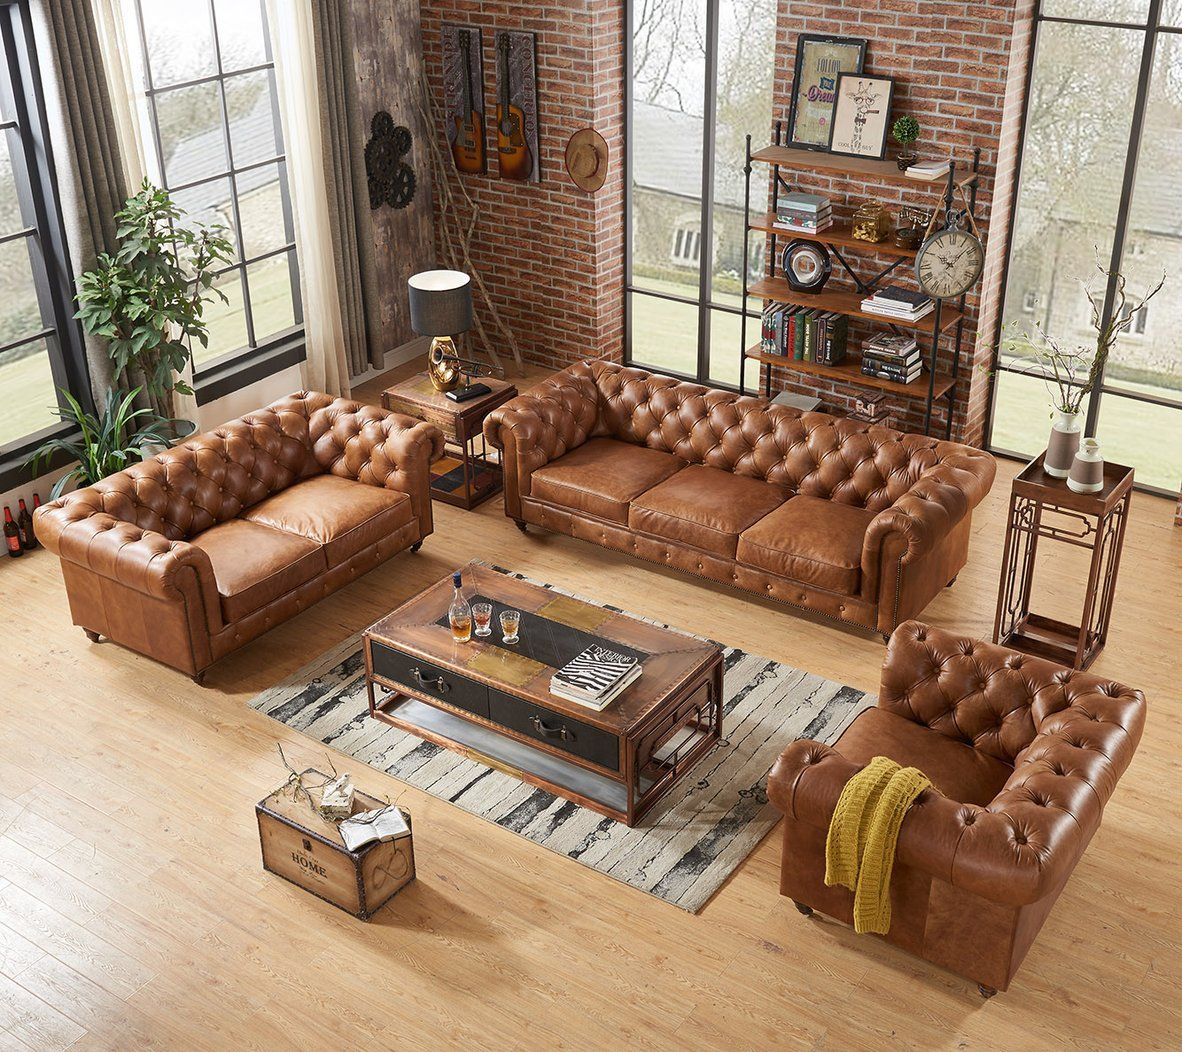 Chesterfield furniture is the best